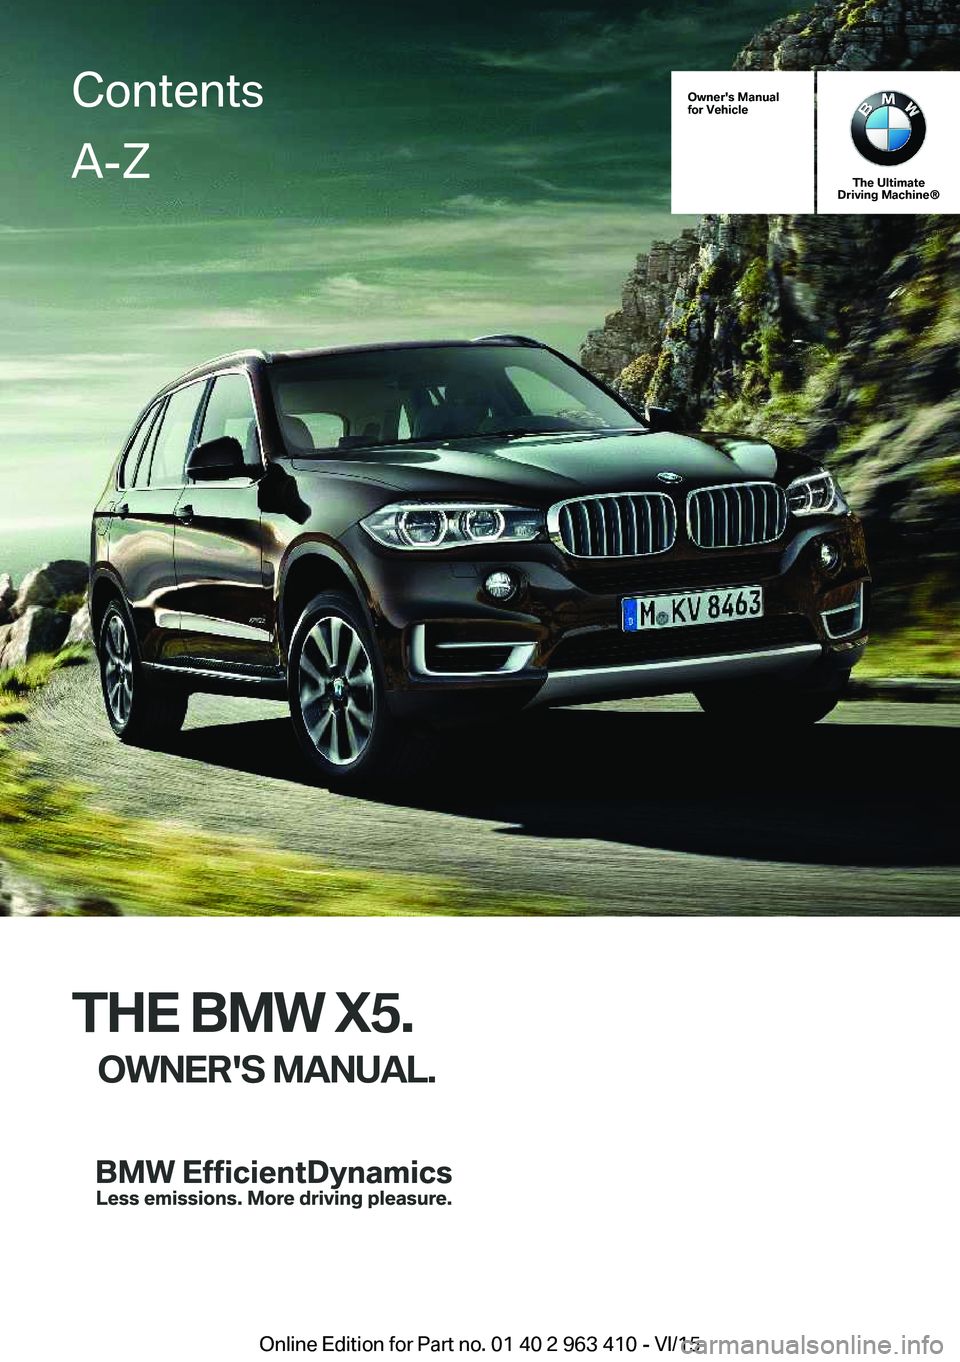 BMW X5 XDRIVE35I 2015  Owners Manual Owner's Manual
for Vehicle
The Ultimate
Driving Machine®
THE BMW X5.
OWNER'S MANUAL.
ContentsA-Z
Online Edition for Part no. 01 40 2 963 410 - VI/15   